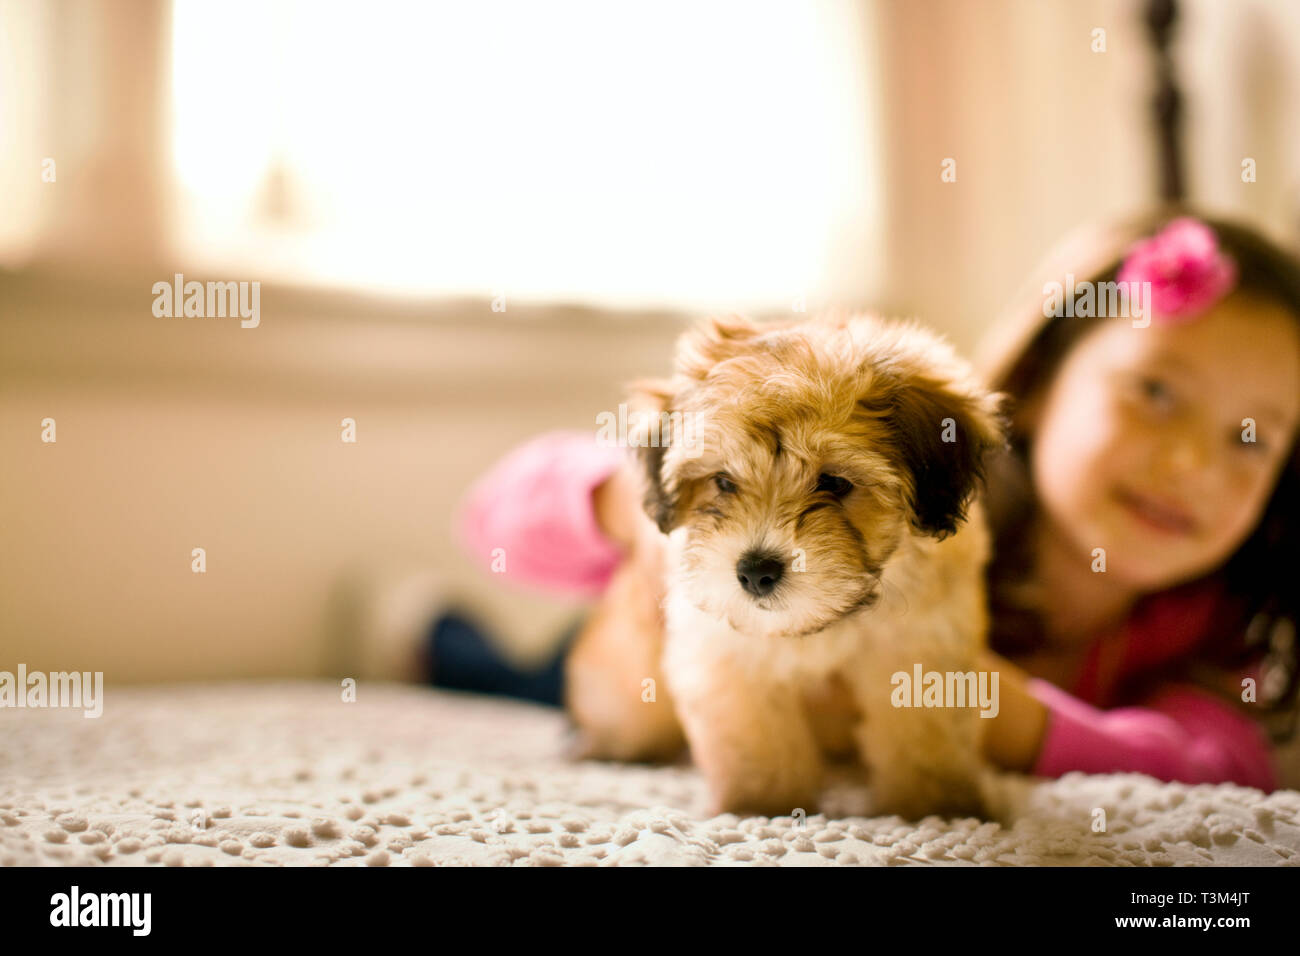 Young girl lying front down on a carpeted floor holds onto a puppy as it tries to walk away as she poses for a portrait. Stock Photo